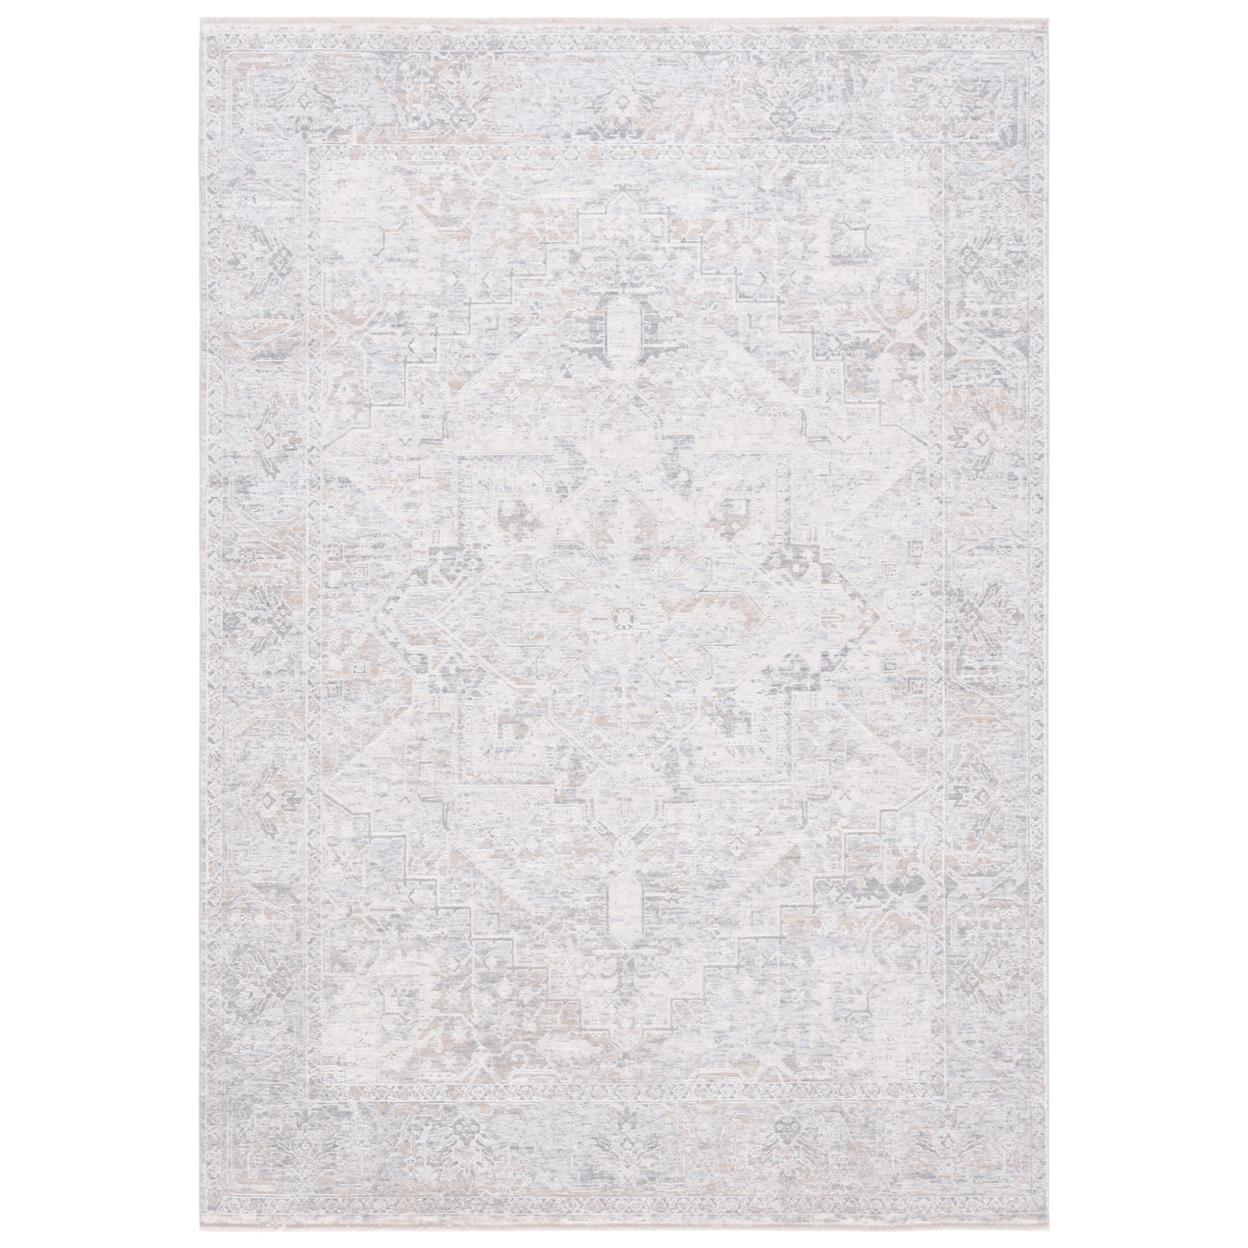 SAFAVIEH Marrakesh Collection MRK612A Ivory / Multi Rug - 6'-7 X 6'-7 Square